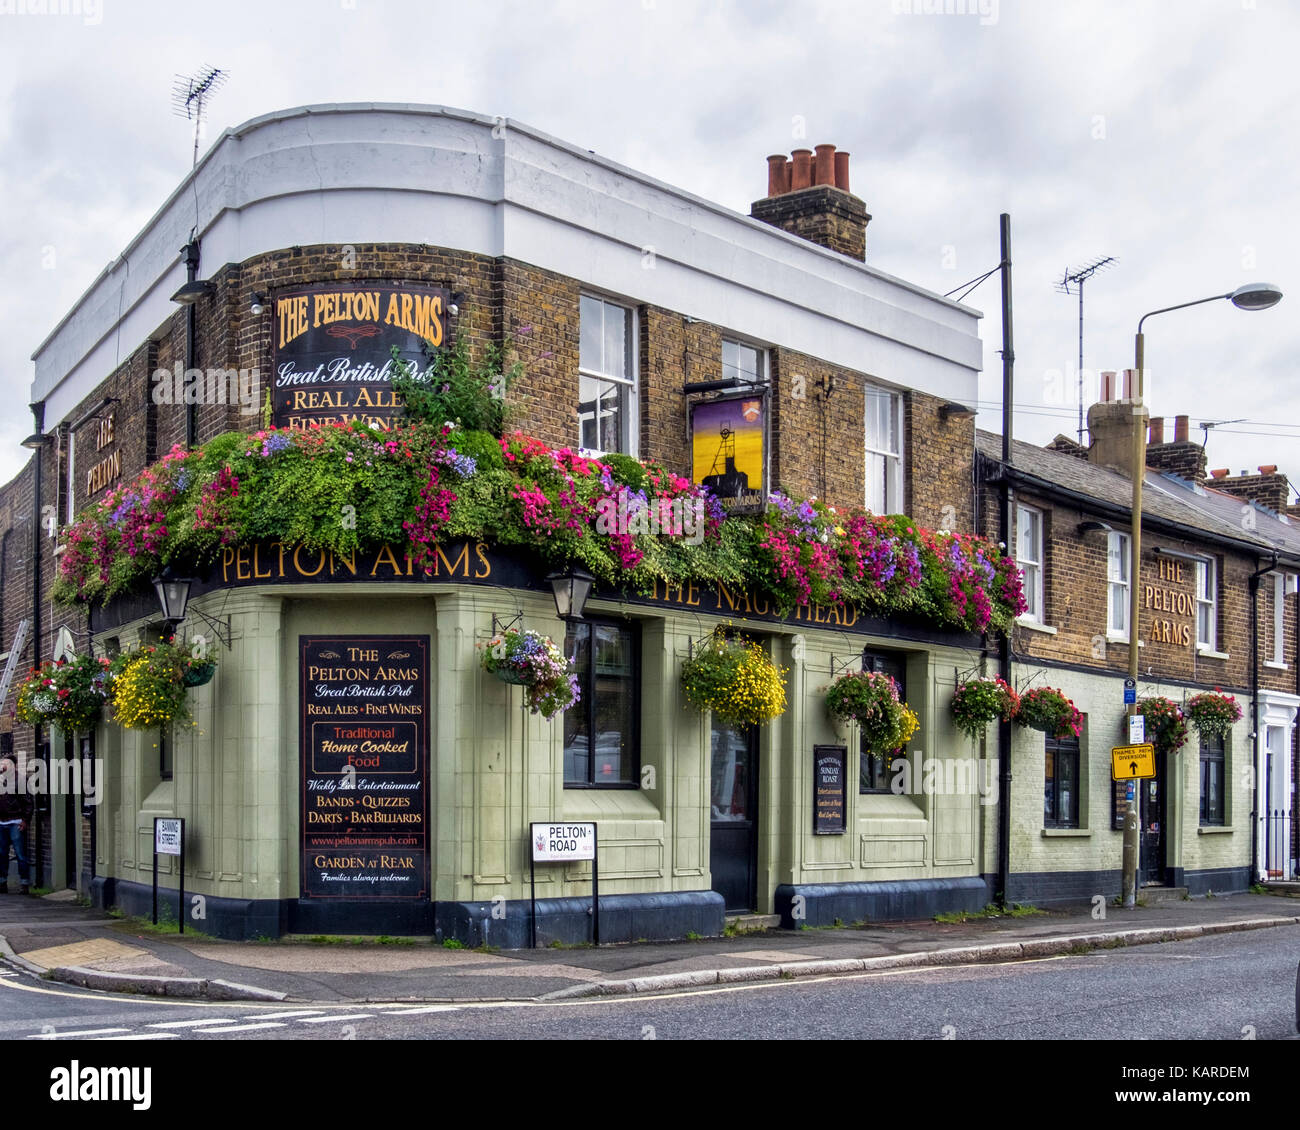 Greenwich, London. The Pelton Arms (previously the Nag's Head), Typical ...